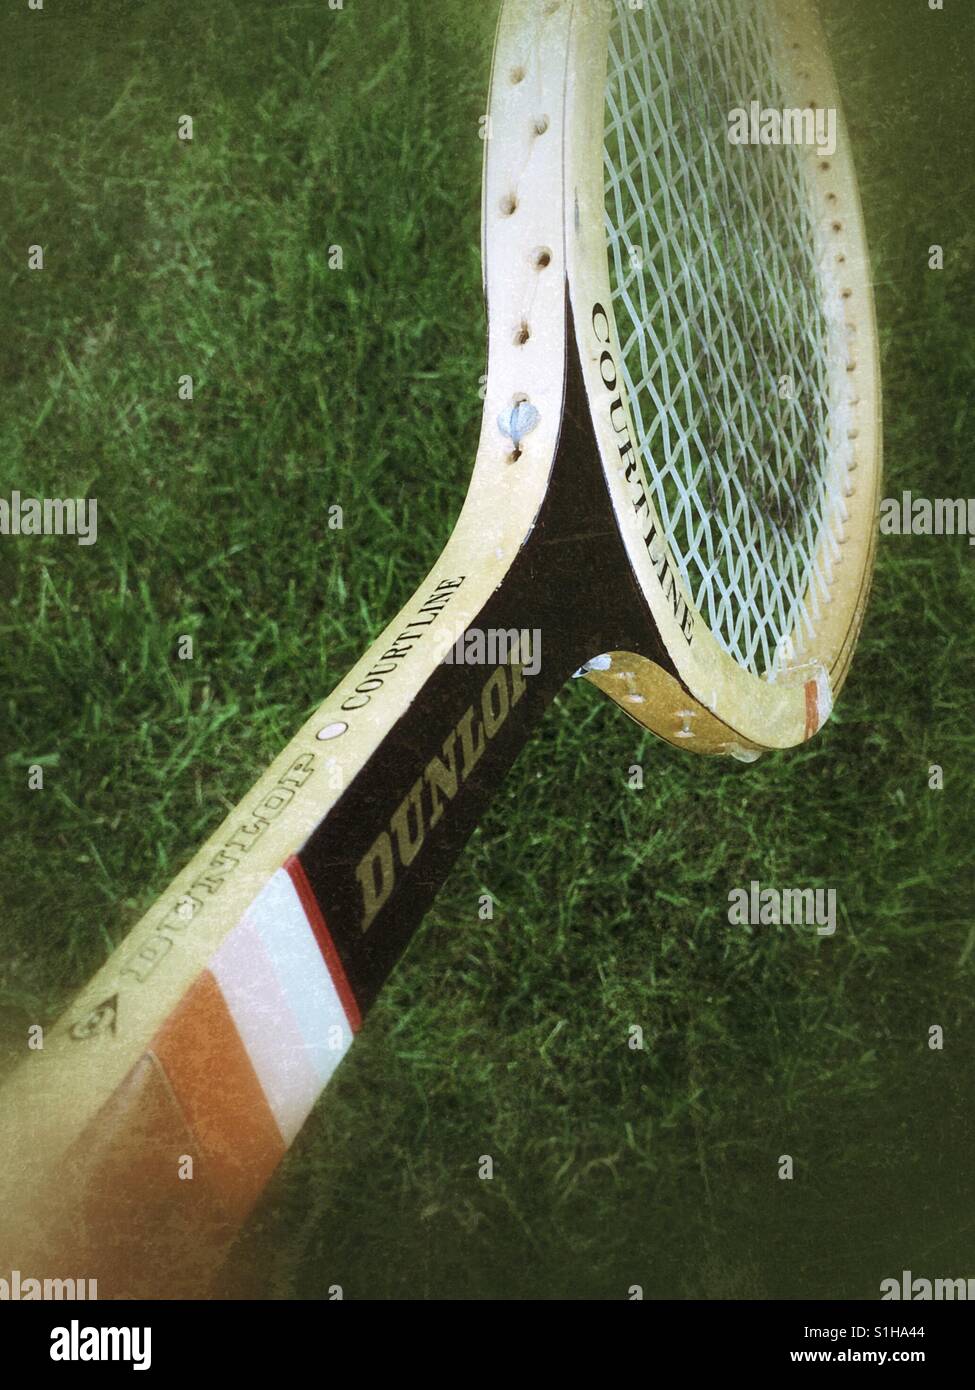 Old fashioned wooden tennis racket Stock Photo